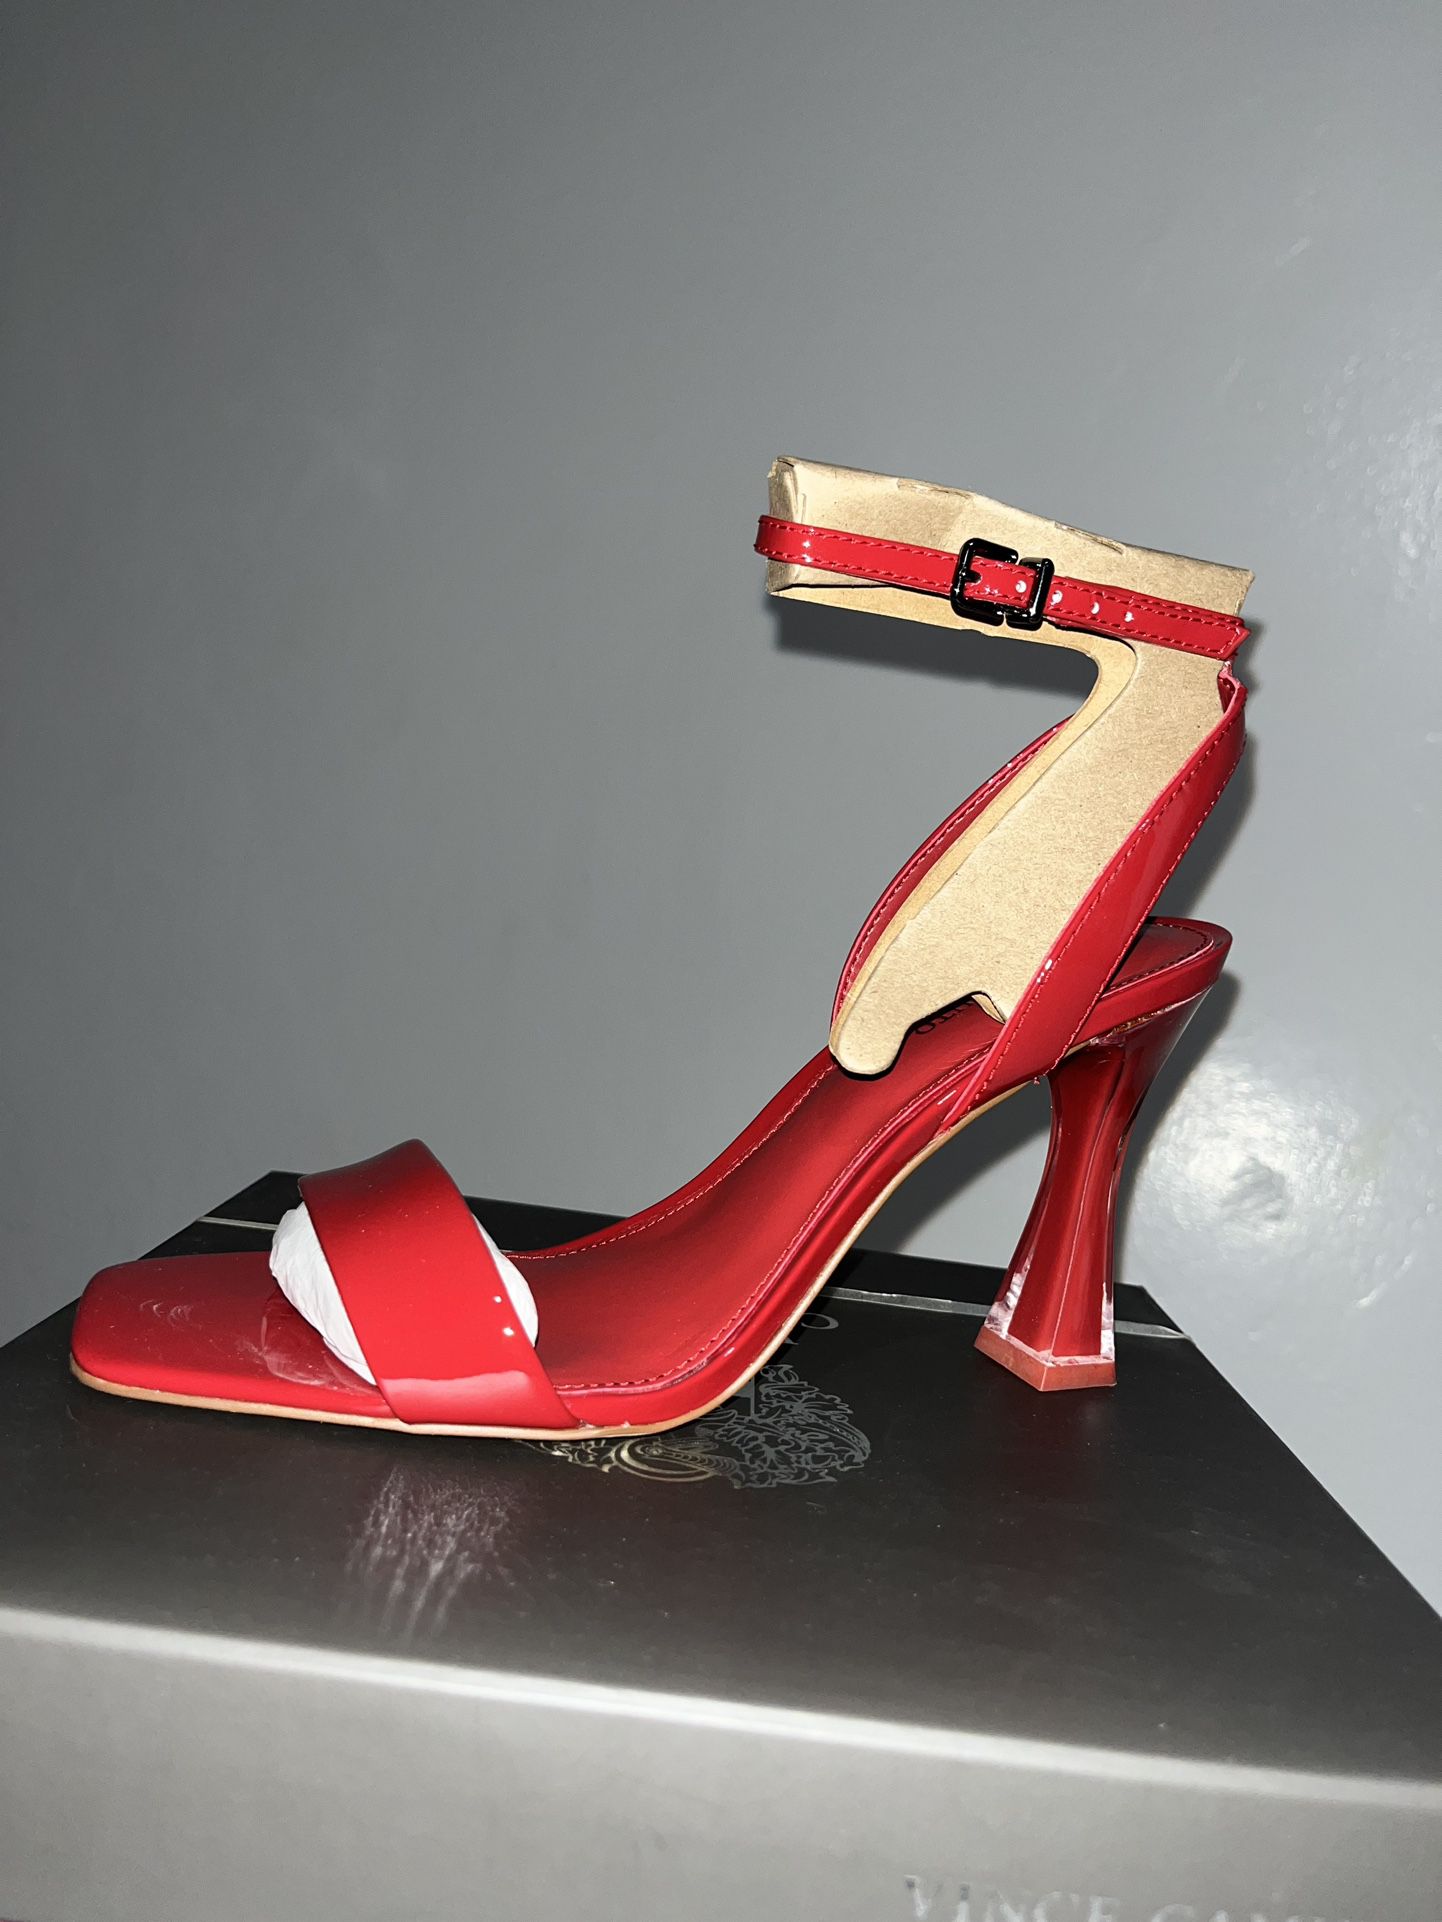 Vince camuto - Fire Red size 8 